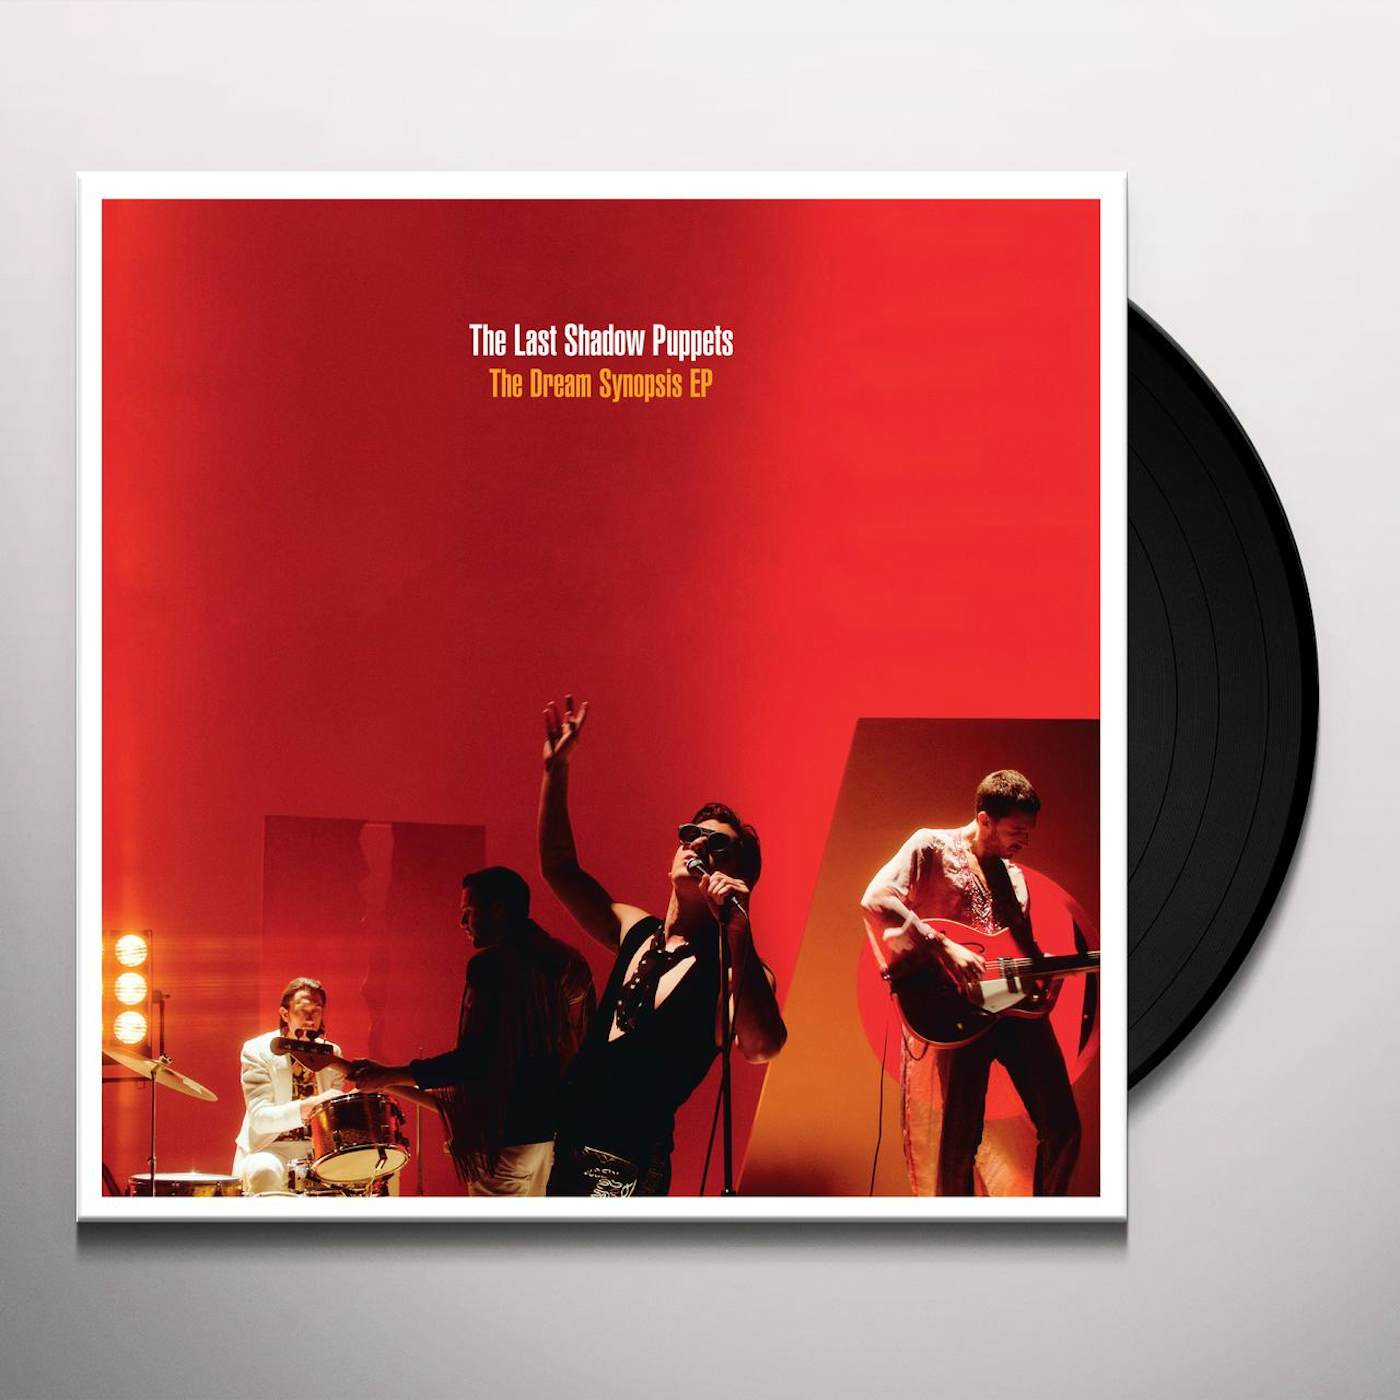 Alligevel Moralsk bunke The Last Shadow Puppets DREAM SYNOPSIS (DL CARD) Vinyl Record